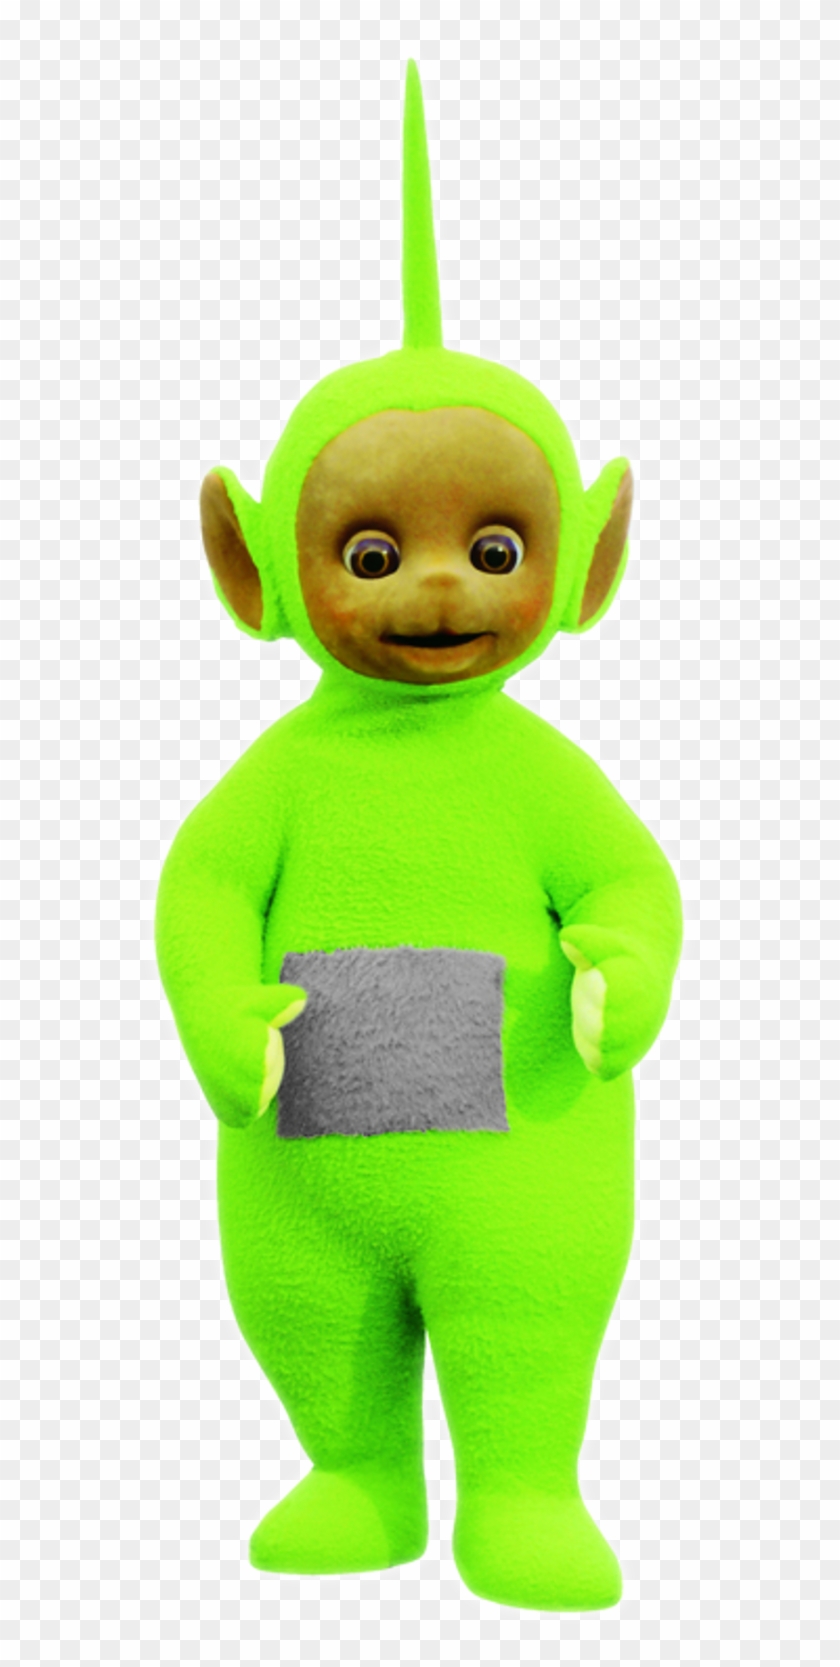 Teletubbies - Dipsy Png Teletubbies Dipsy Clipart #2656926